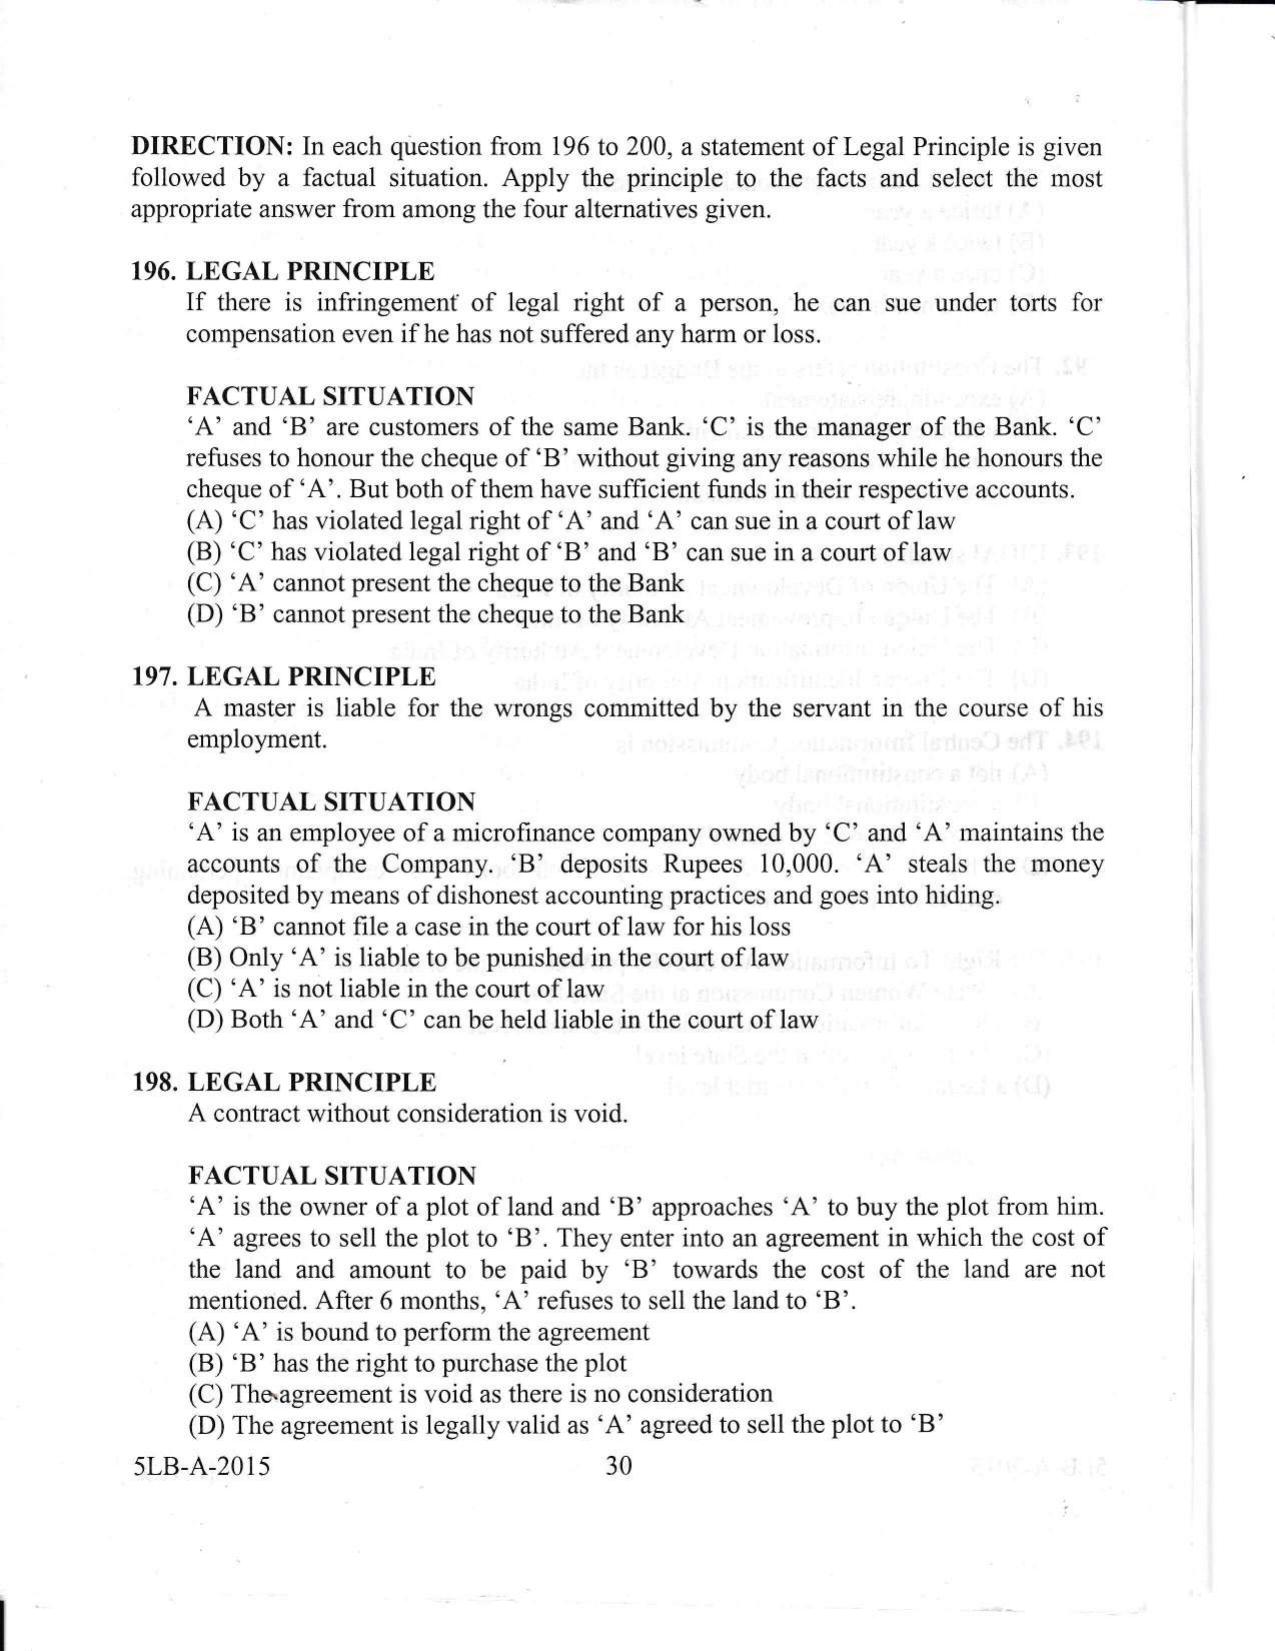 KLEE 5 Year LLB Exam 2015 Question Paper - Page 30